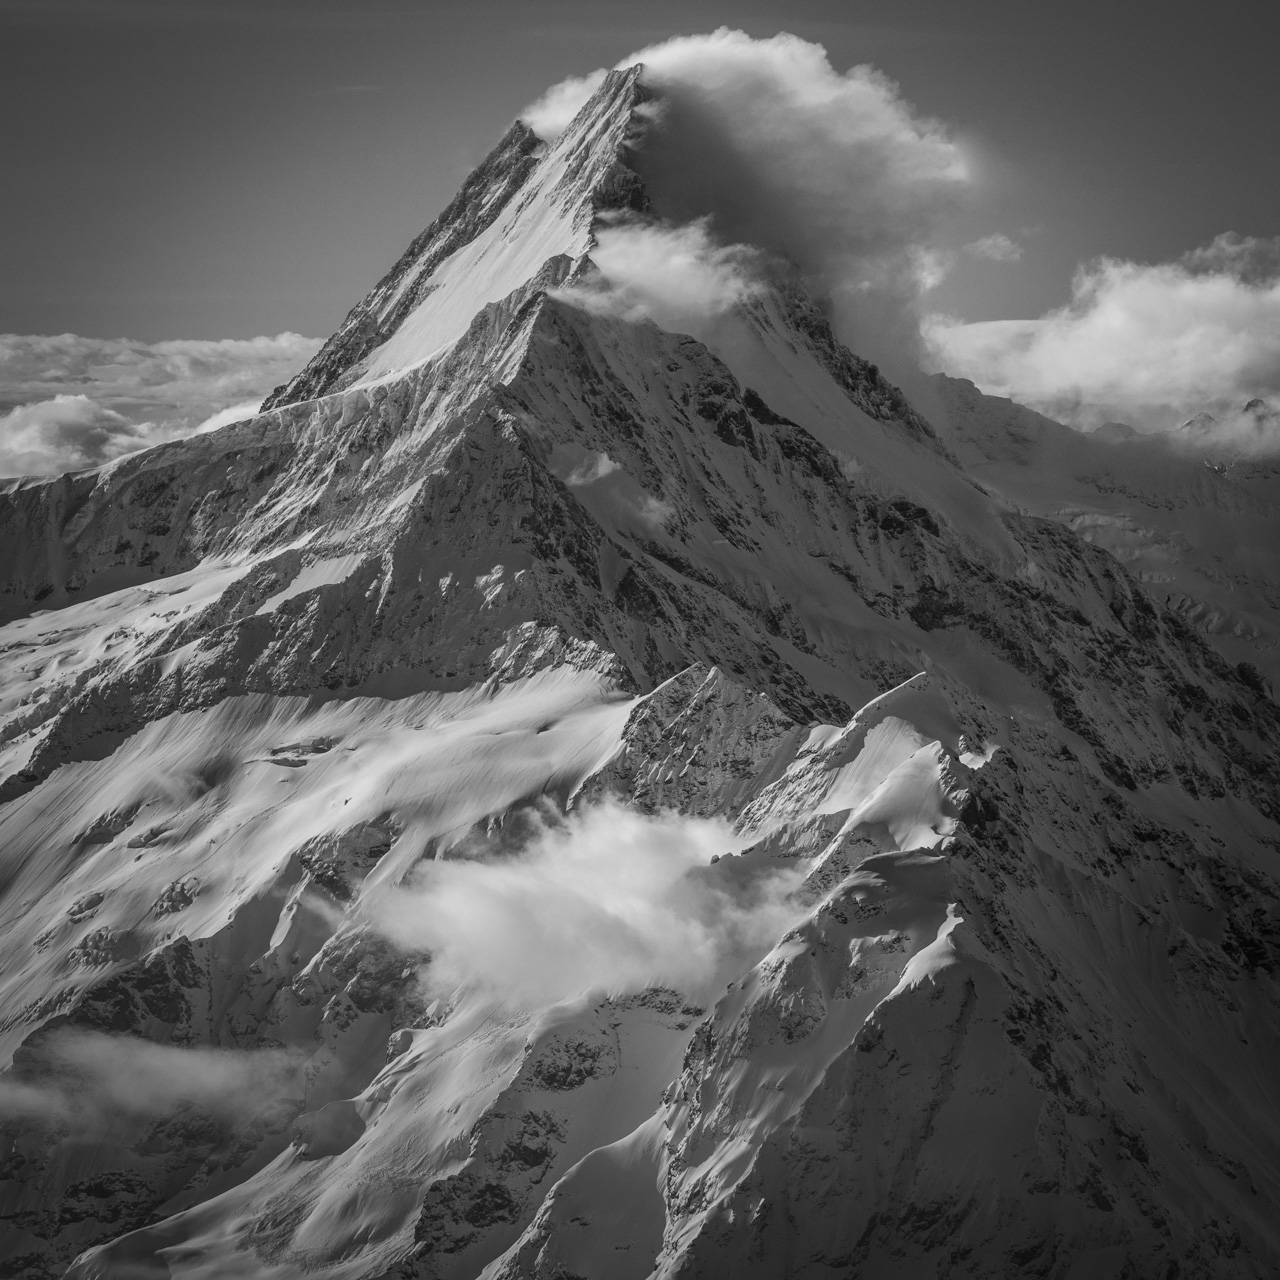 Schreckhorn - Lauteraarhorn - summit black and white mountain - Grindelwald  in the clouds in the sun after a storm